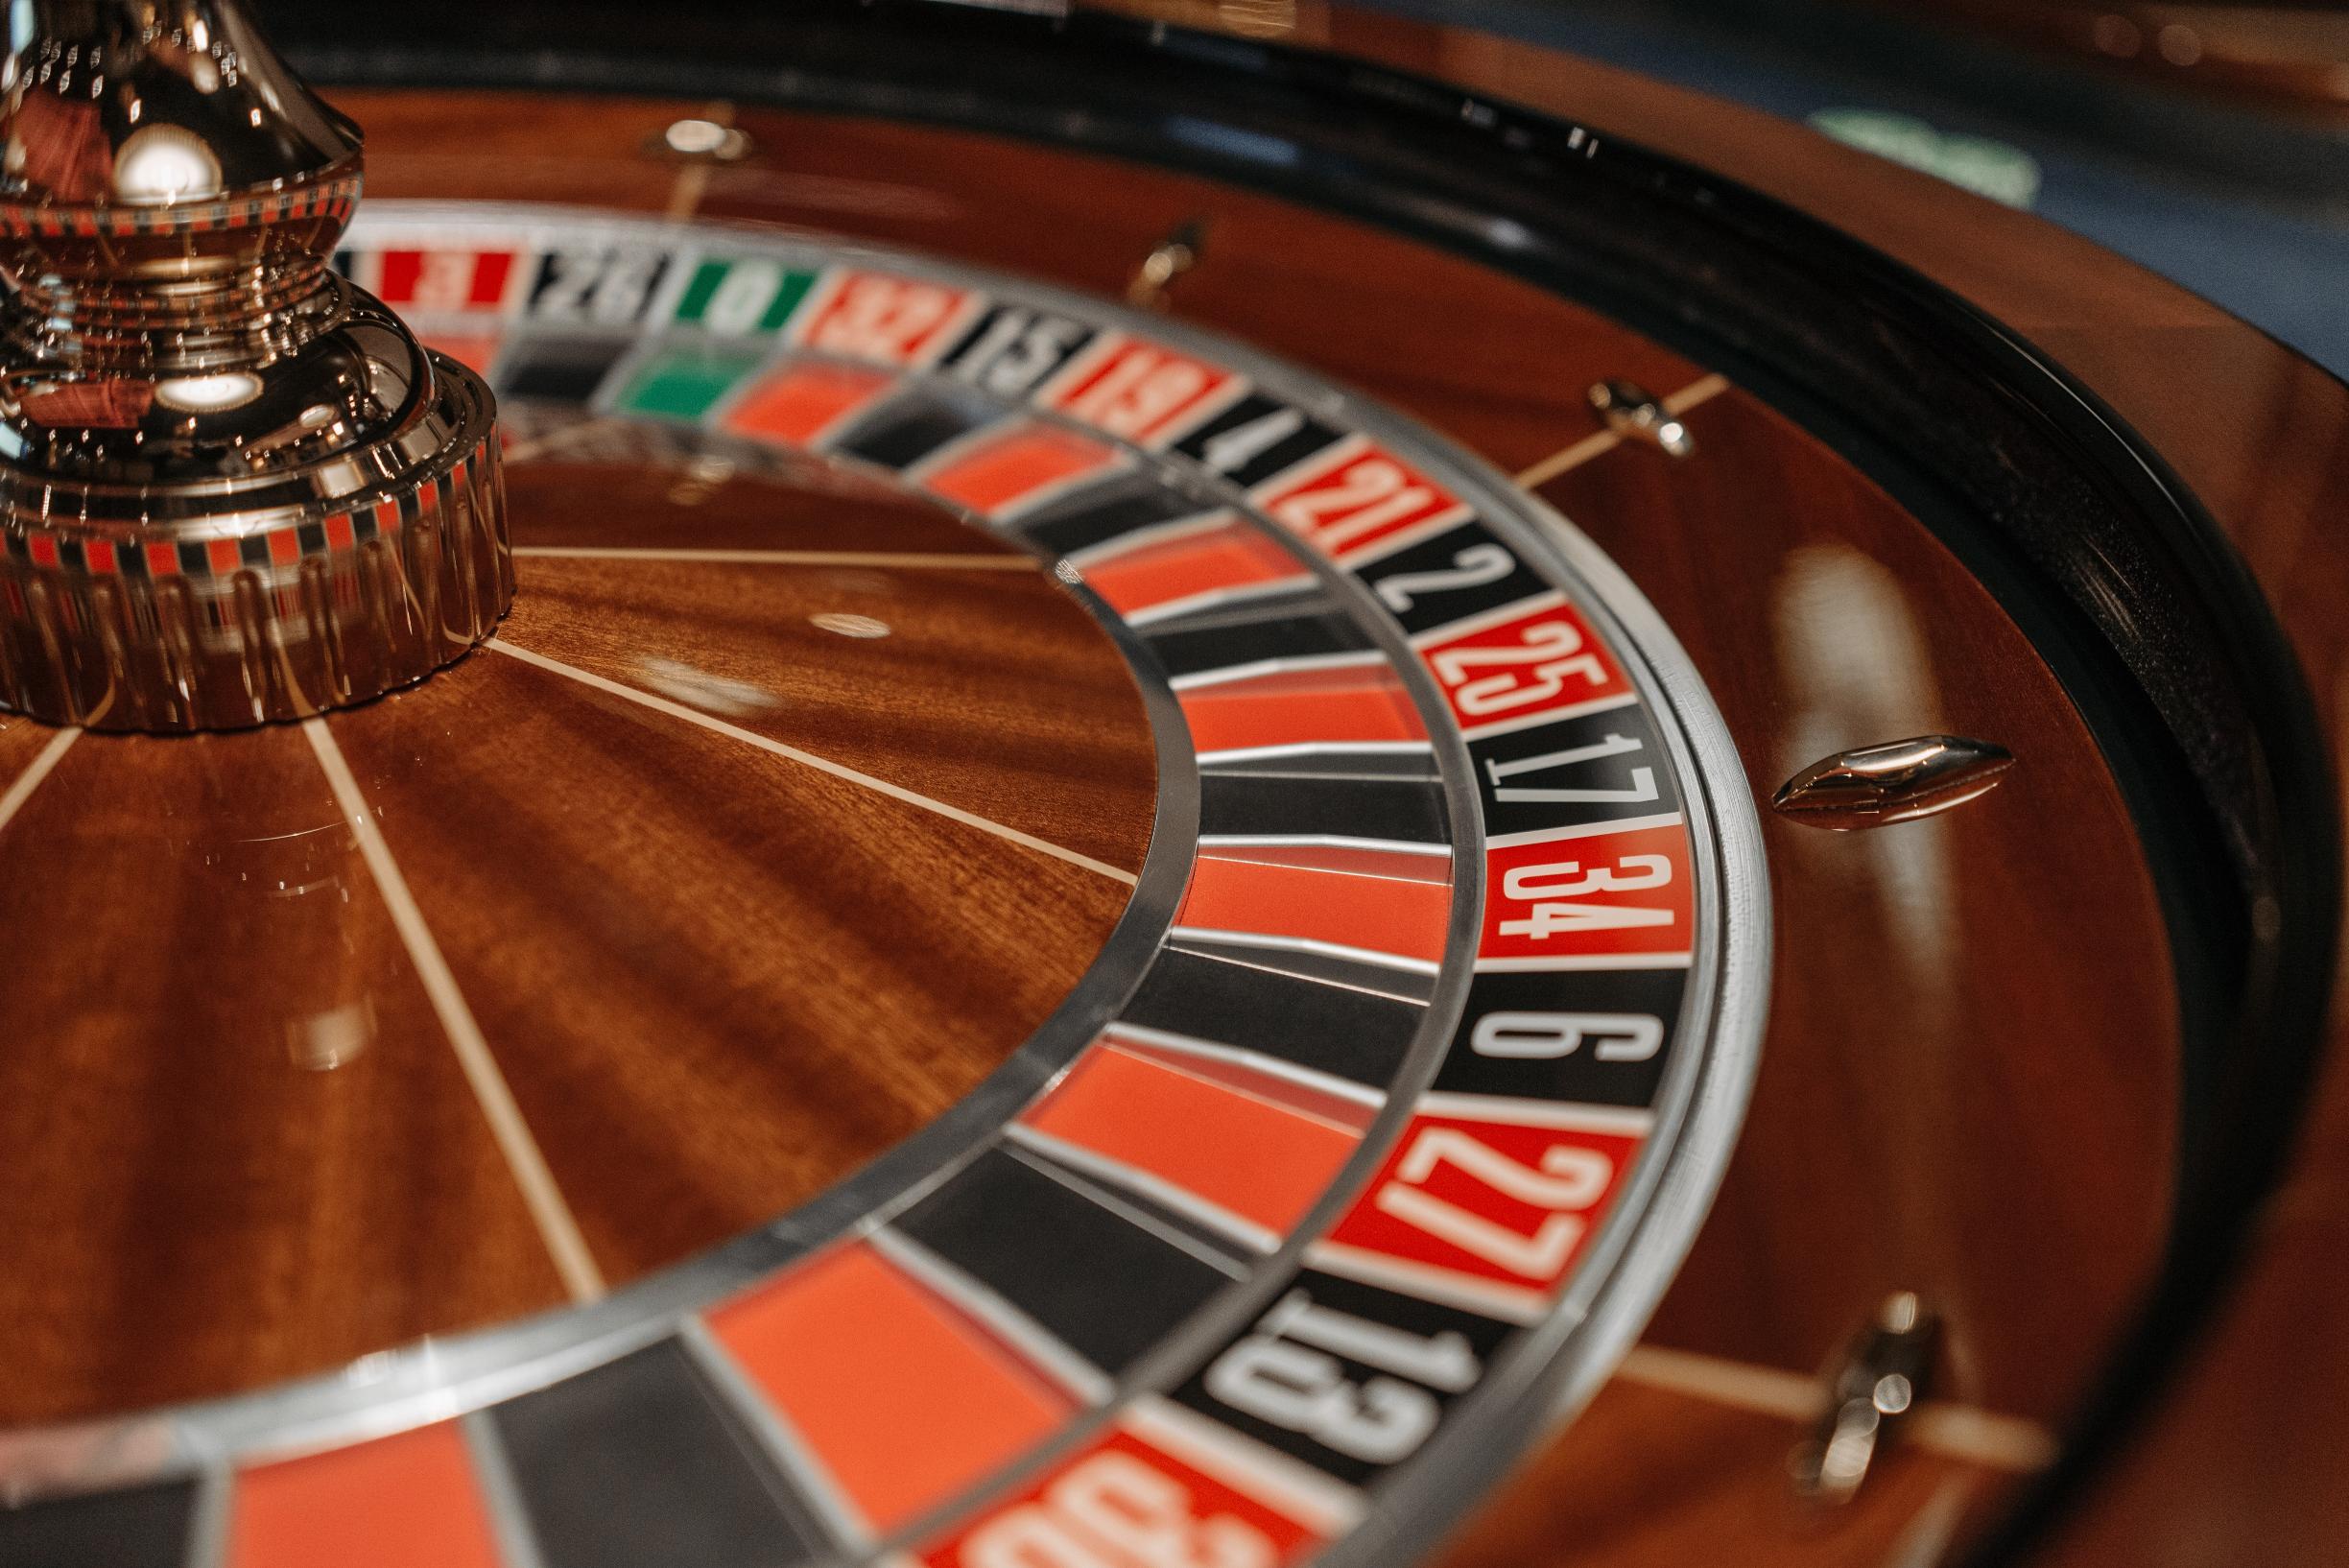 What are the top 10 controversial decisions in the casino industry this year?